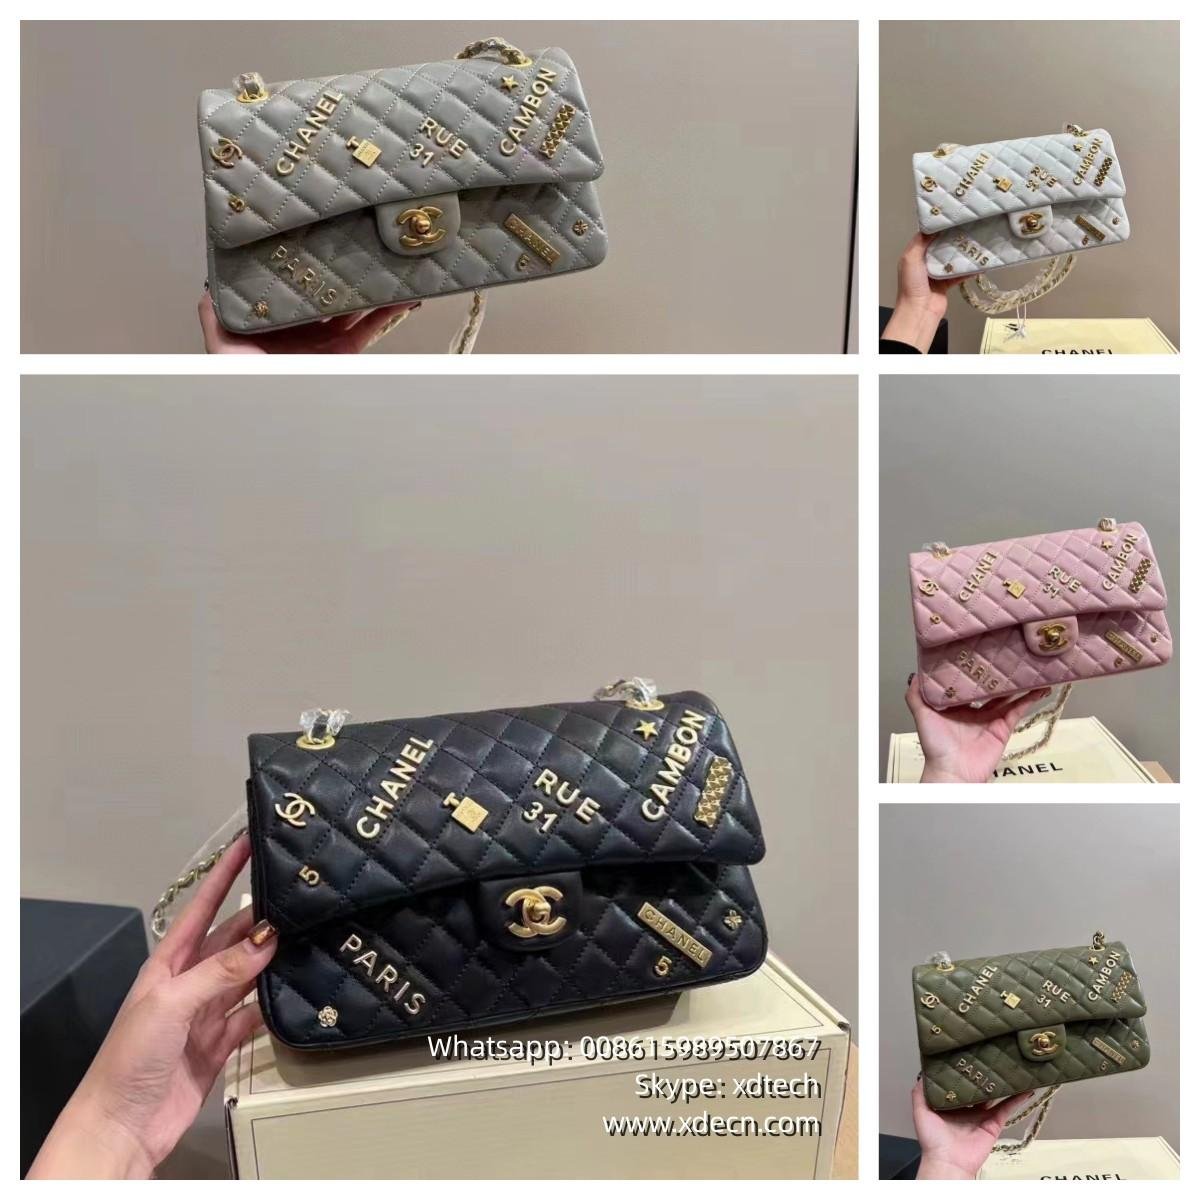 Wholesale Bags, Lady Bags, Classic Evening Bags, Chain Bags